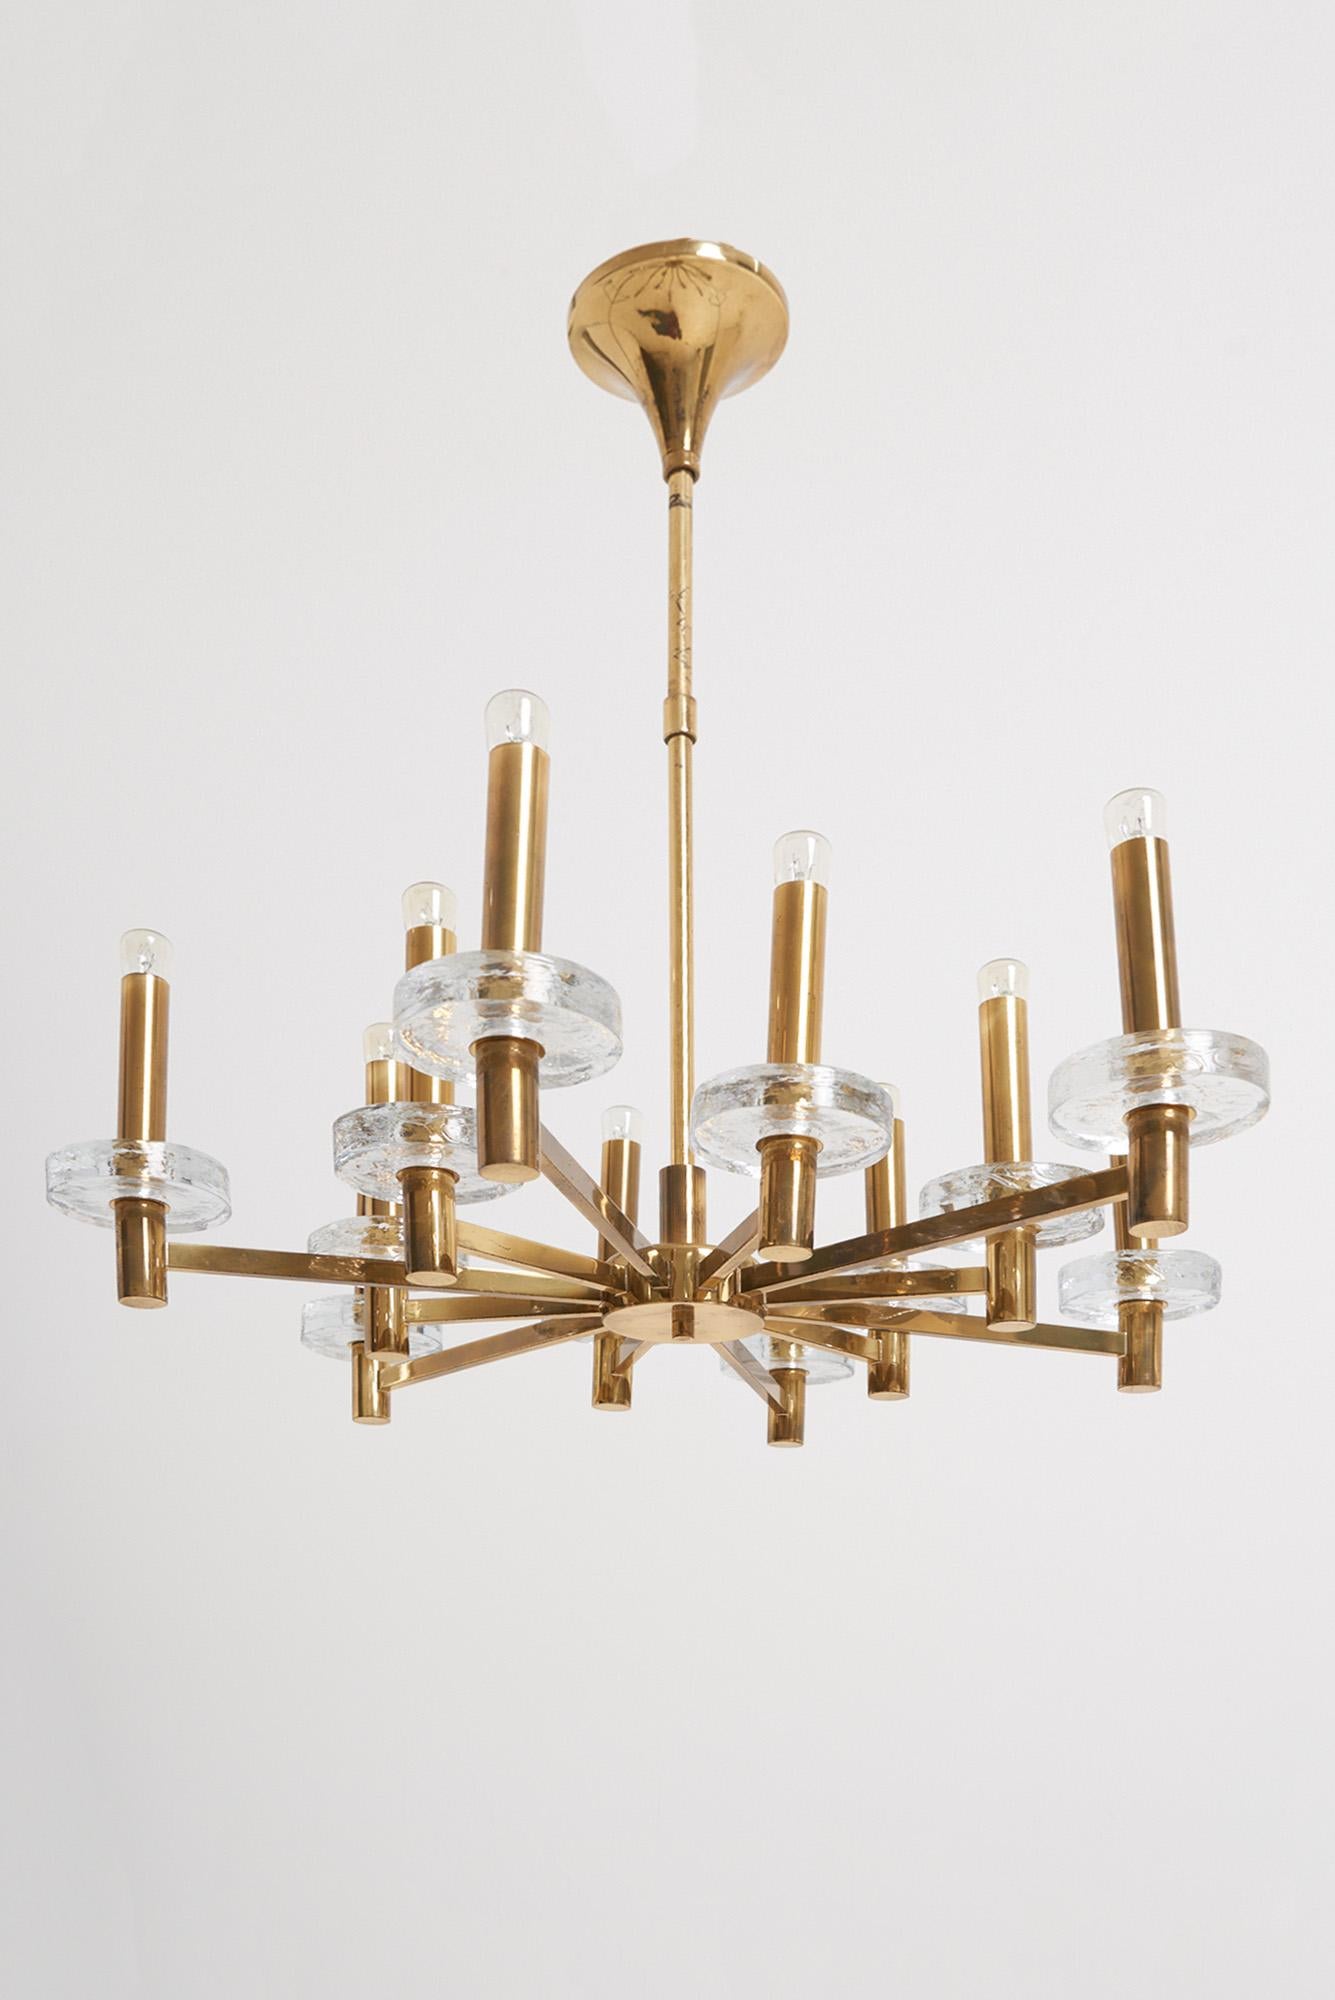 A 12-light brass and glass ceiling light by Gaetano Sciolari
Italy, mid 20th Century
68 cm high by 64 cm diameter